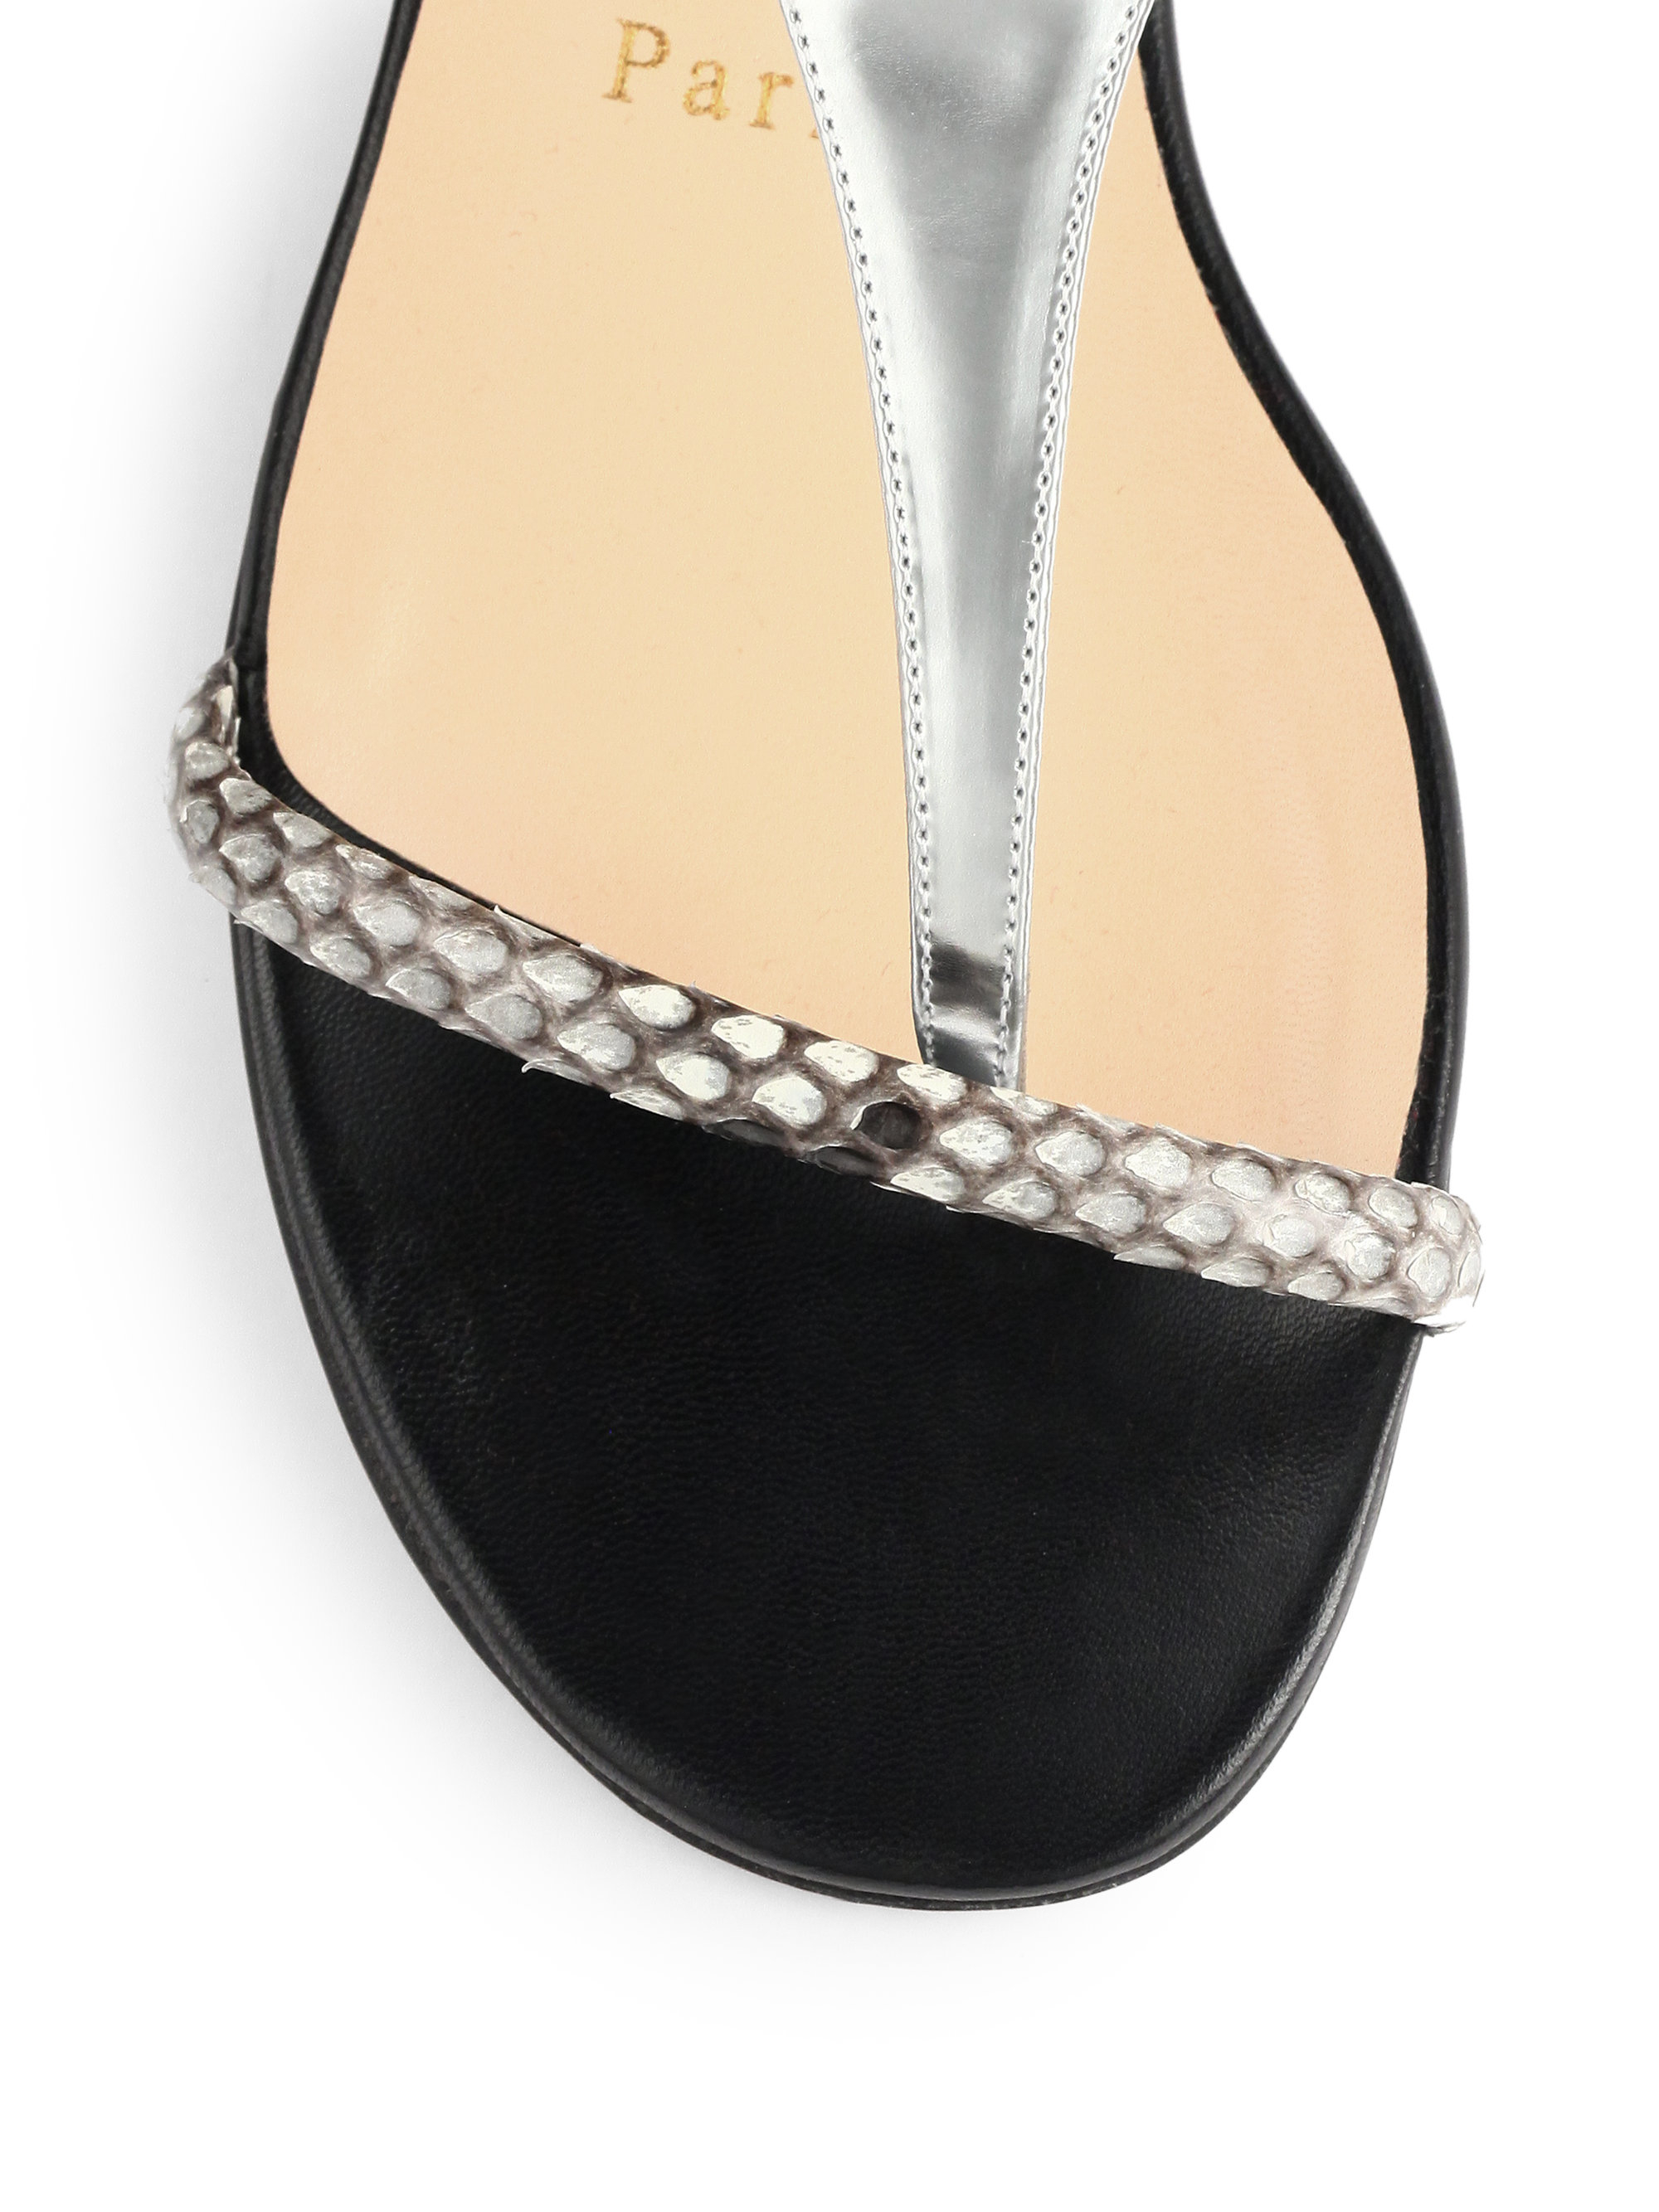 mens louboutin spiked loafers - Christian louboutin Athena Python T-strap Flat Sandals in Silver ...